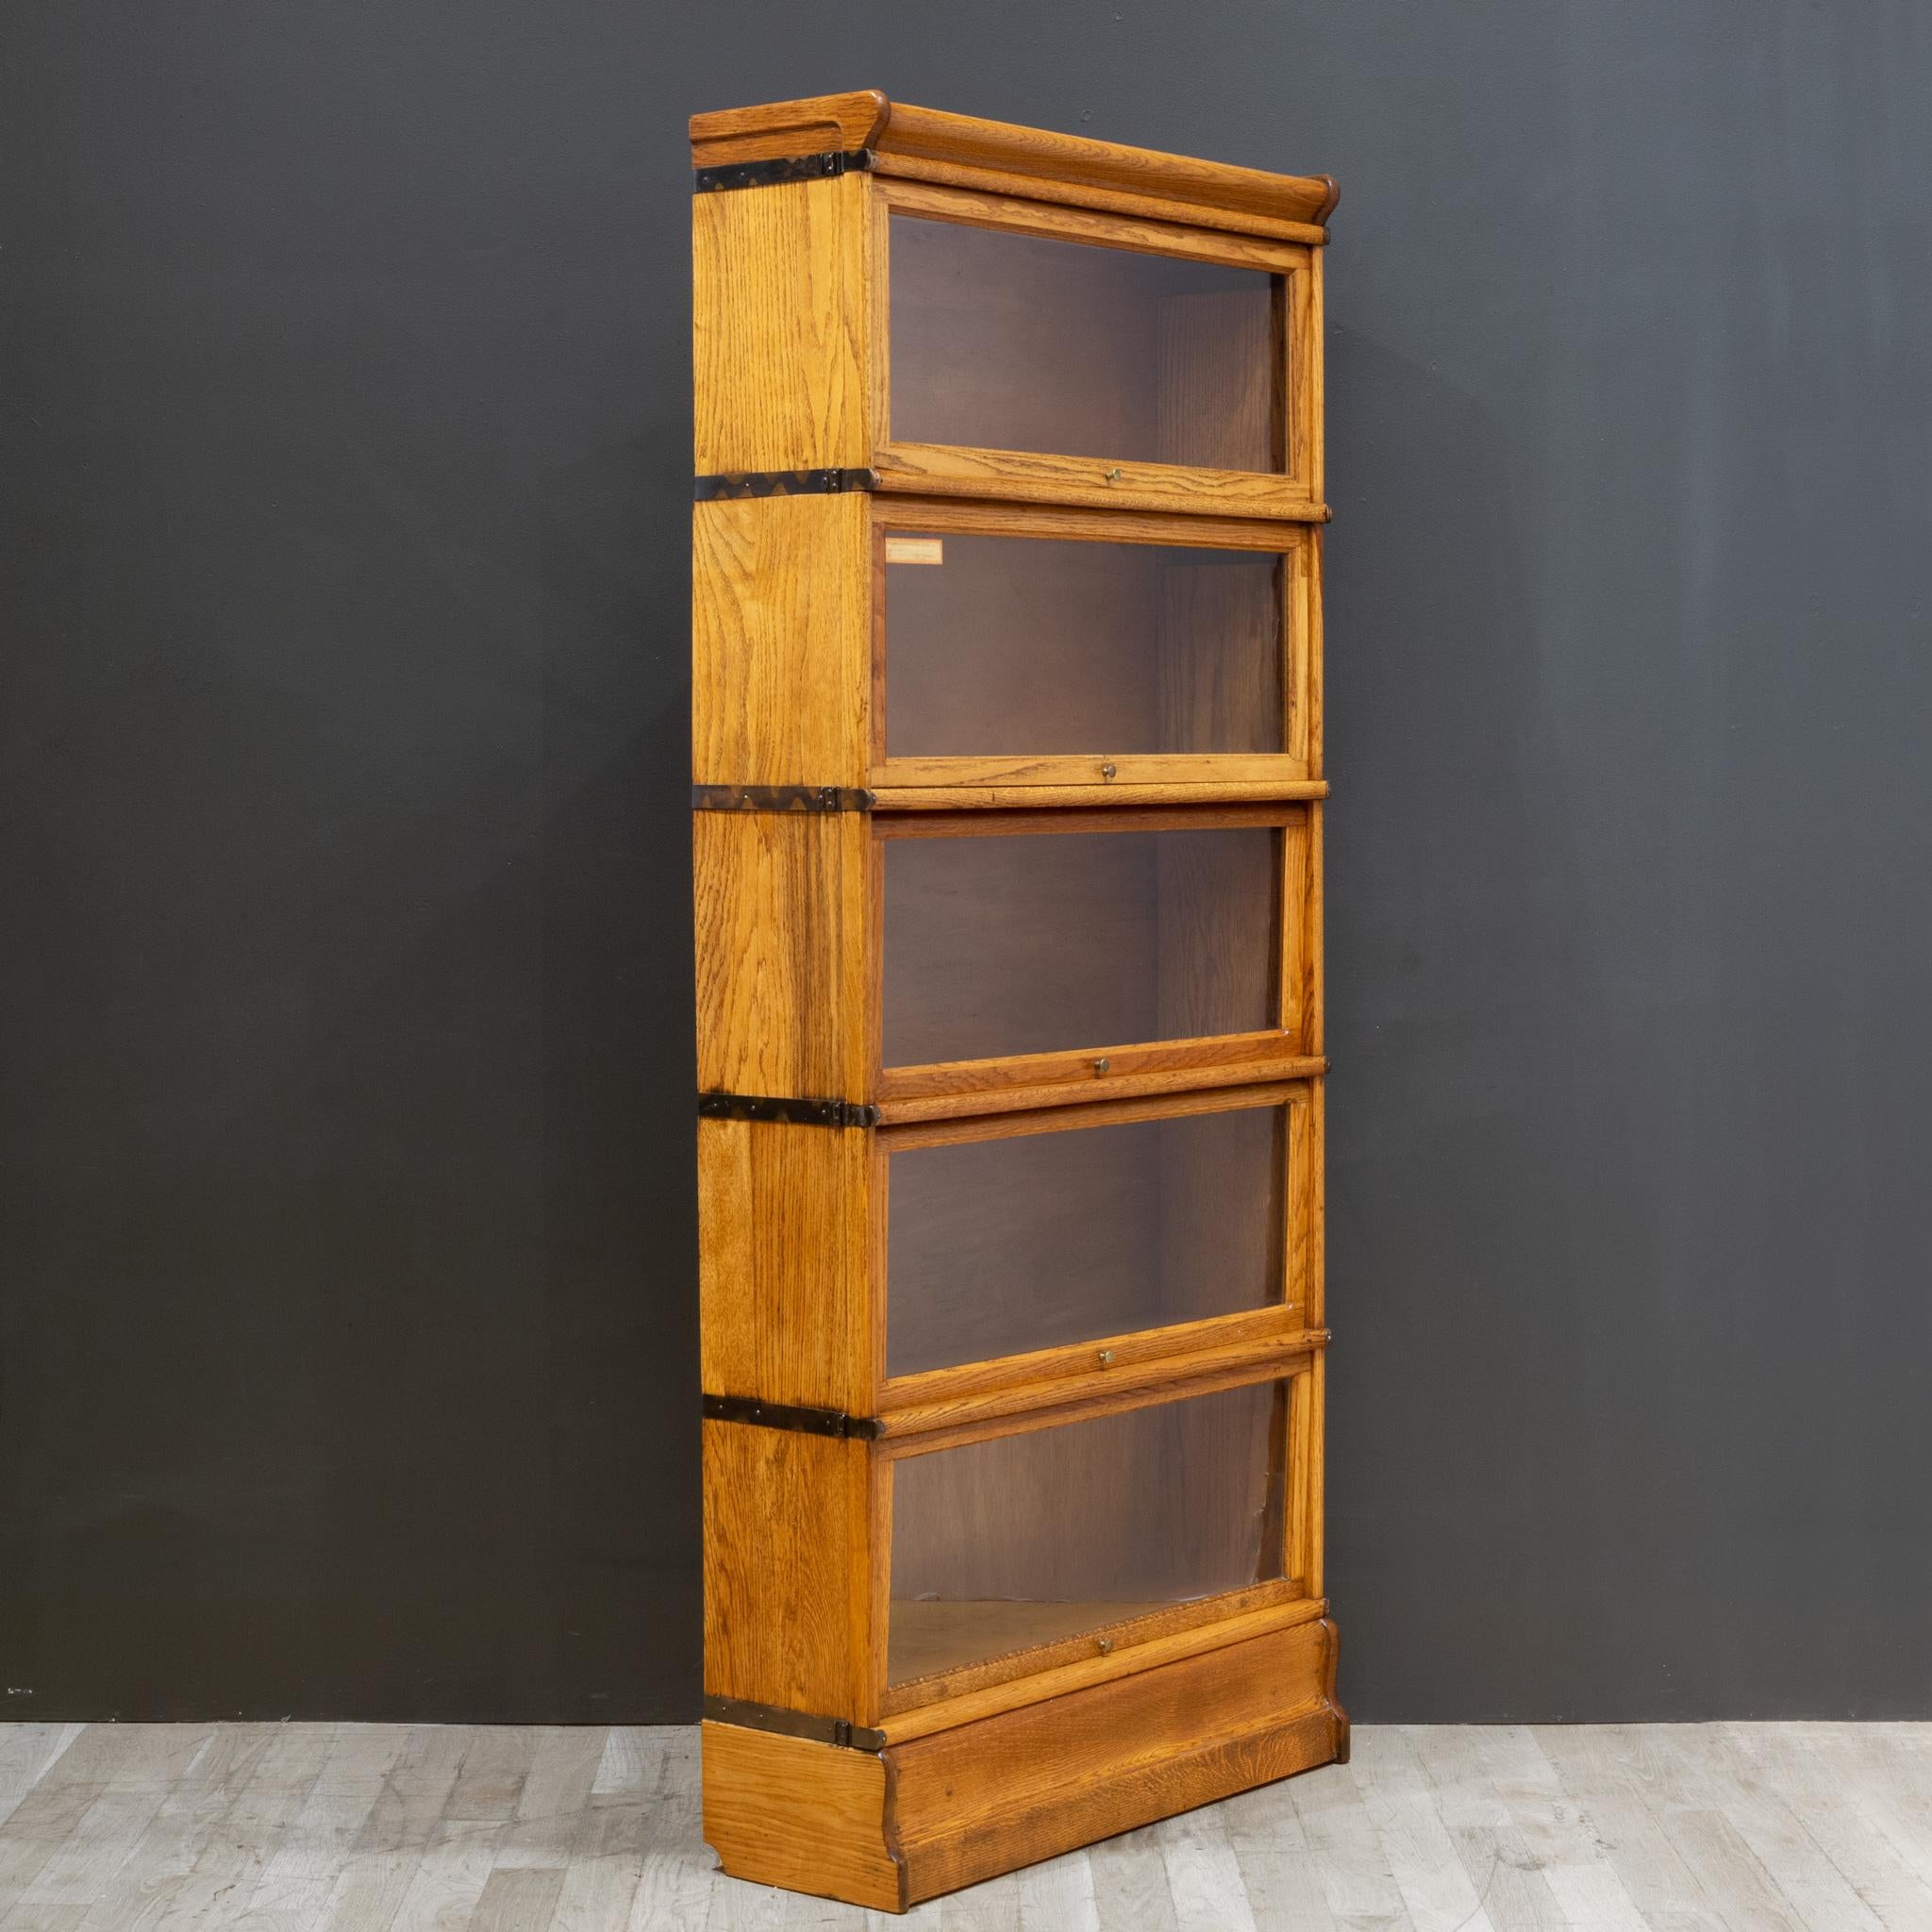 Early 20th c. Globe-Wernicke 5 Stack Lawyer's Bookcase c.1900-1910 In Good Condition For Sale In San Francisco, CA